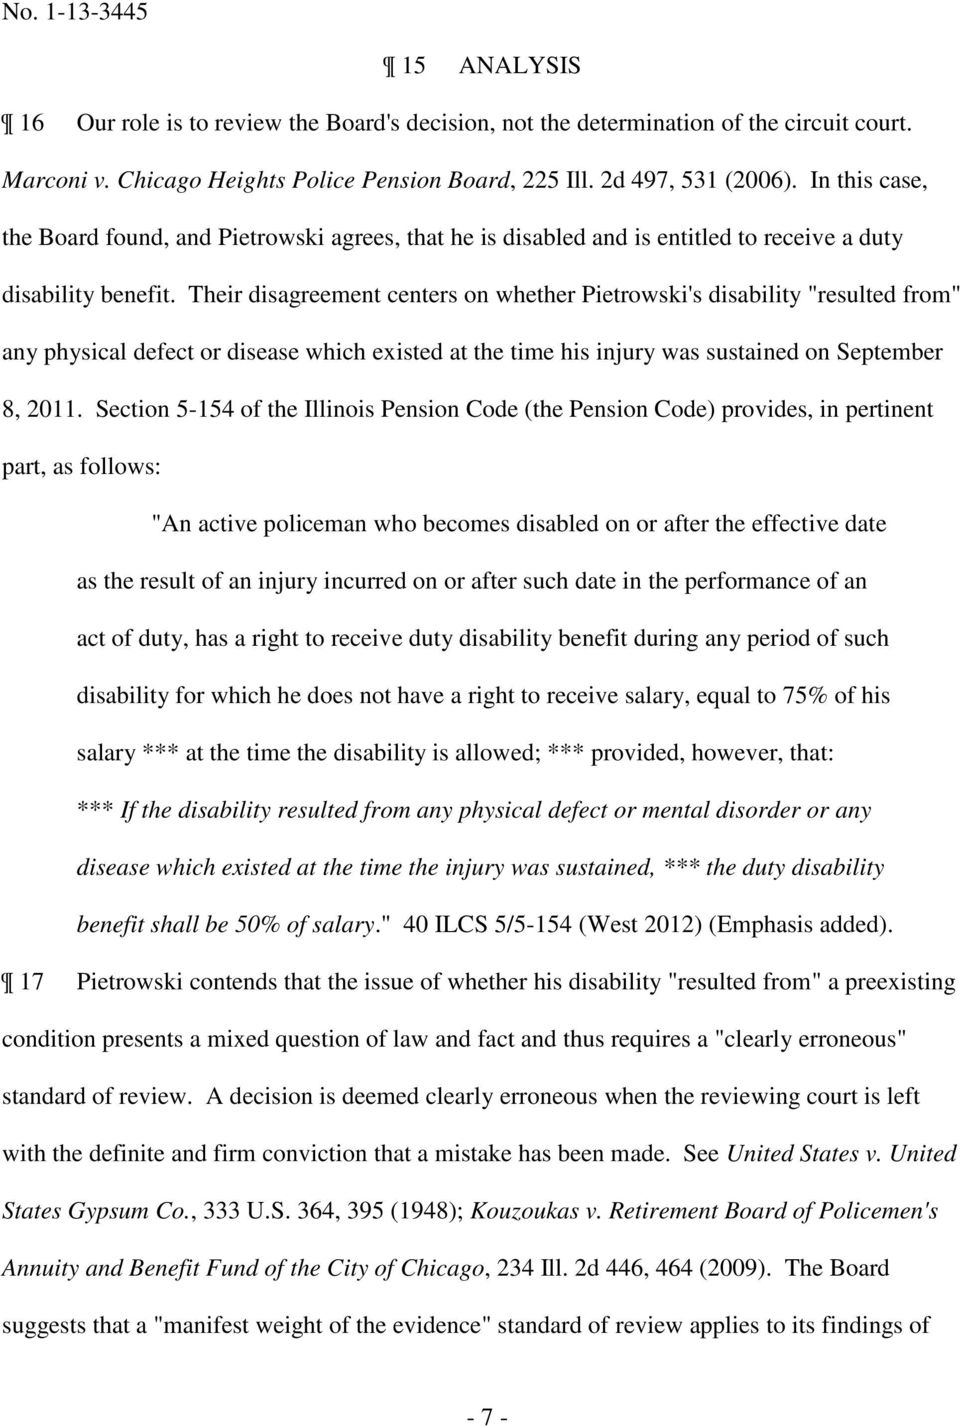 Their disagreement centers on whether Pietrowski's disability "resulted from" any physical defect or disease which existed at the time his injury was sustained on September 8, 2011.